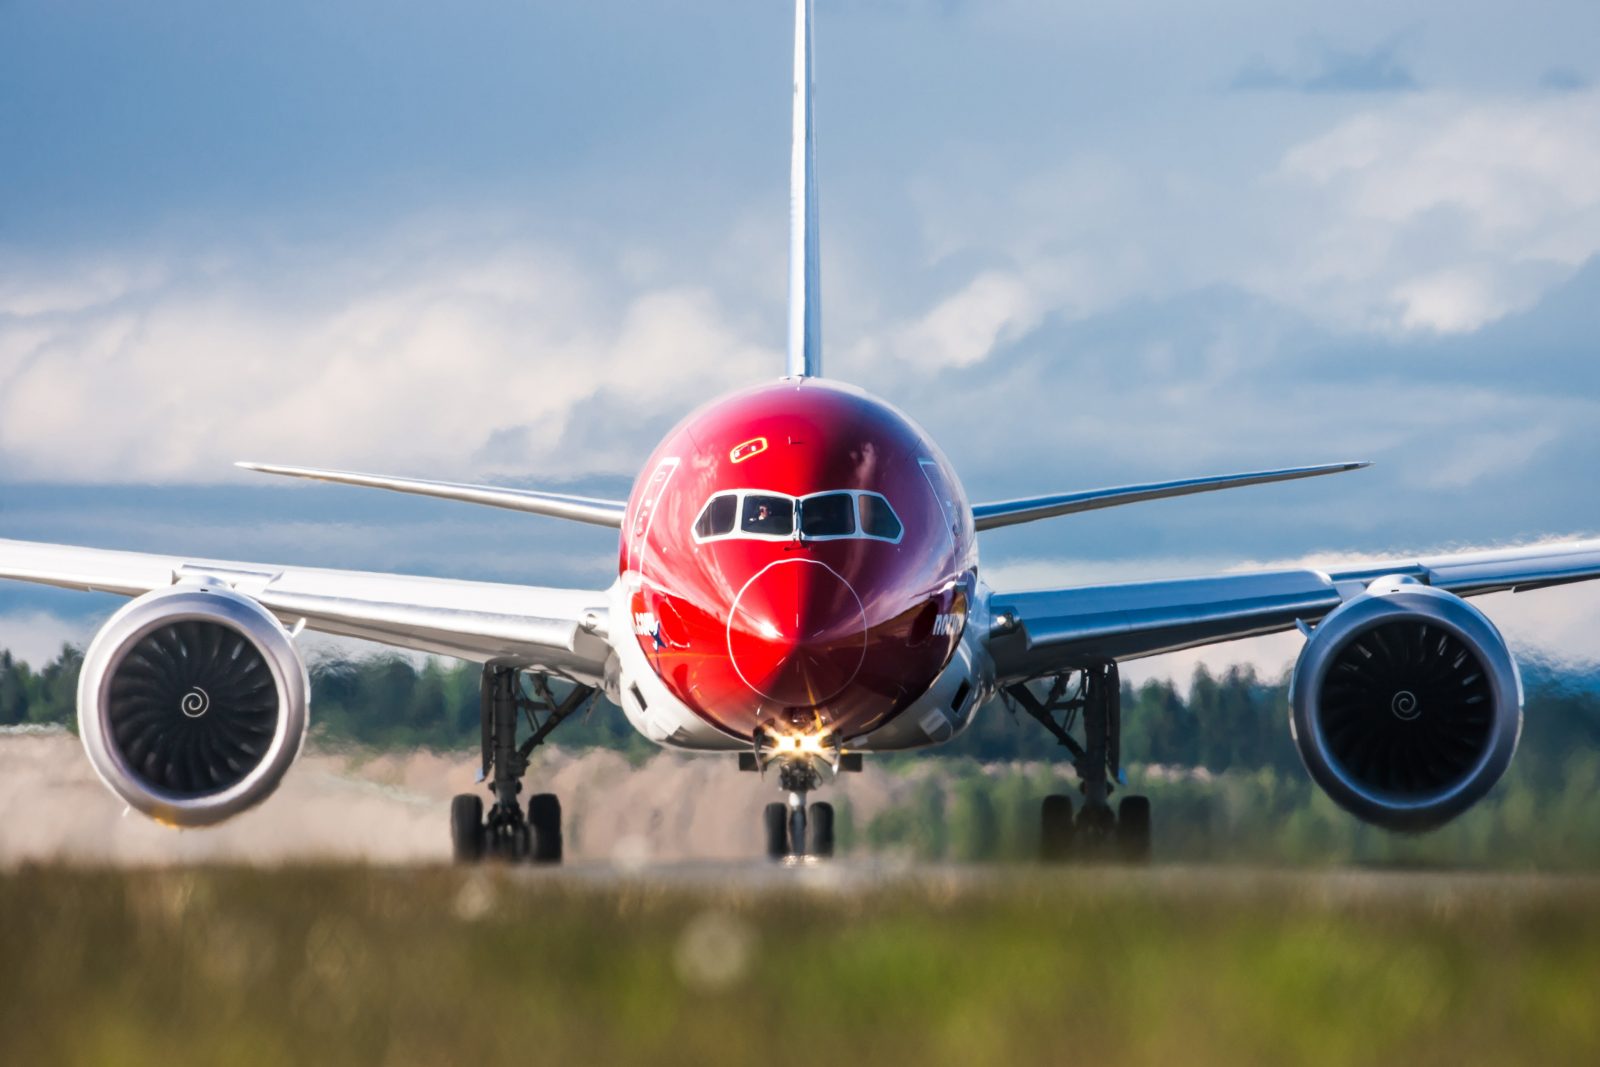 Low-Cost Airline Norwegian is Doubling Down On Cost Cutting